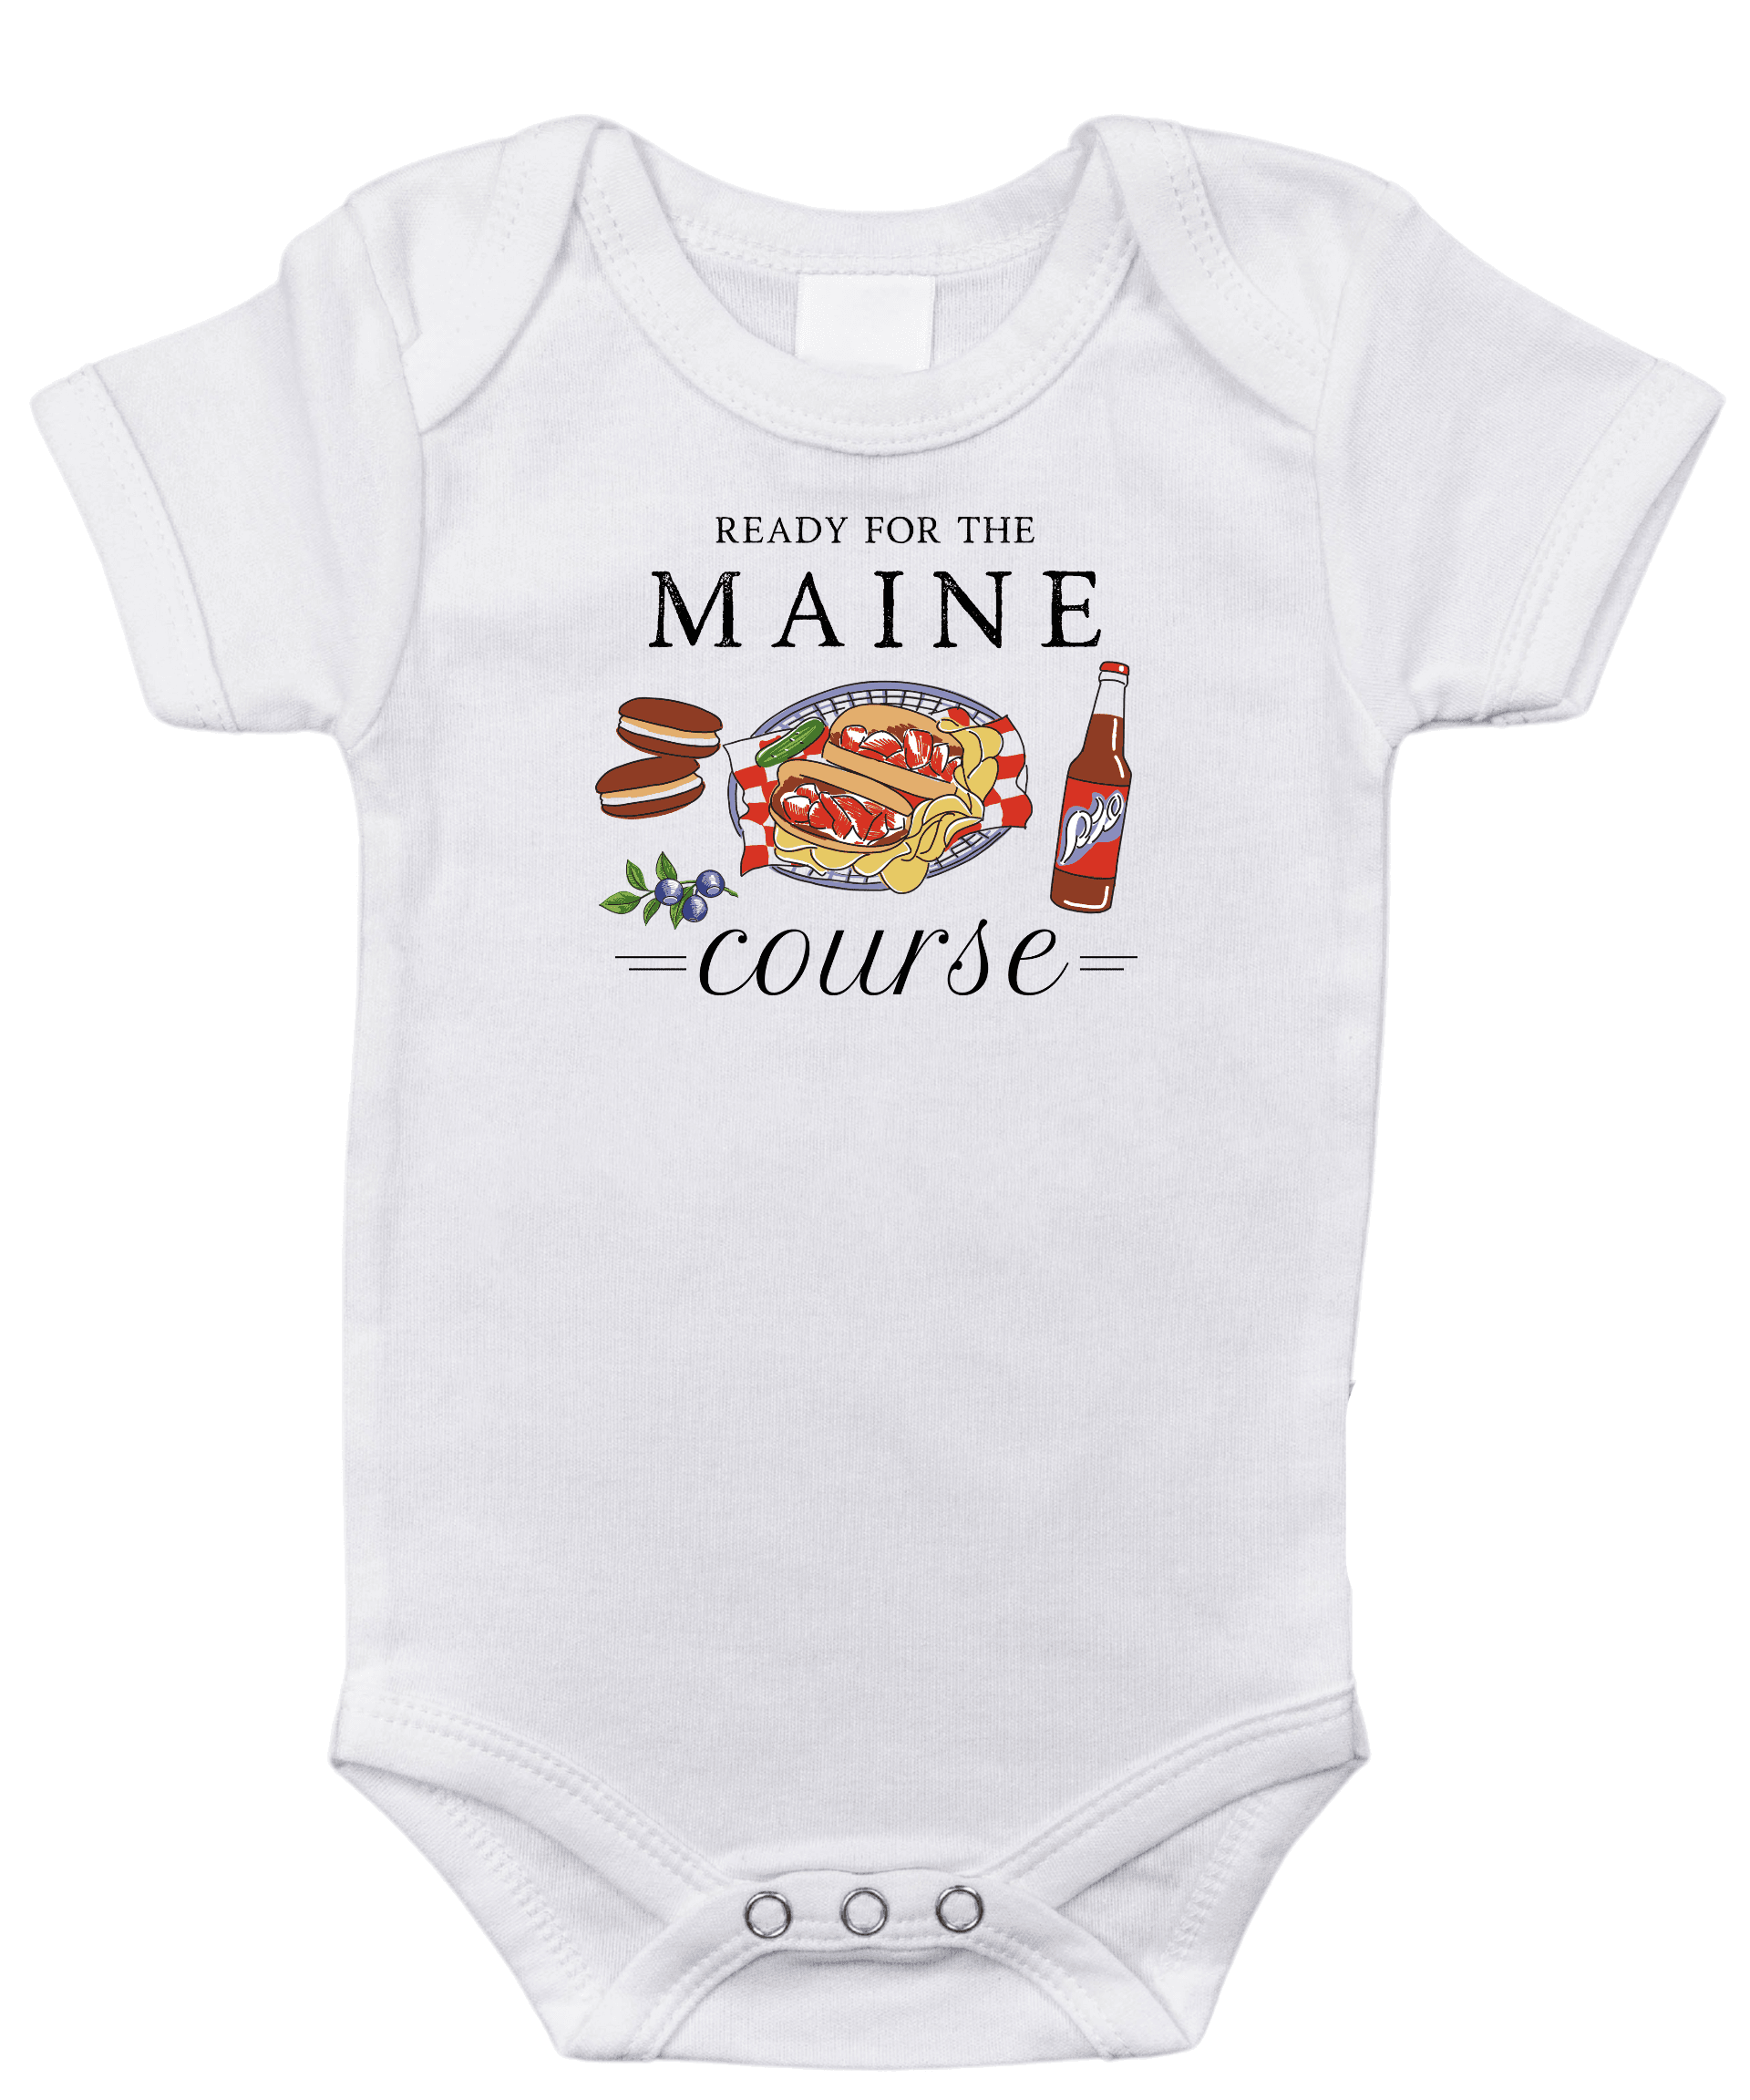 White baby onesie with "Maine Course" text and a lobster graphic, evoking a playful and regional charm.